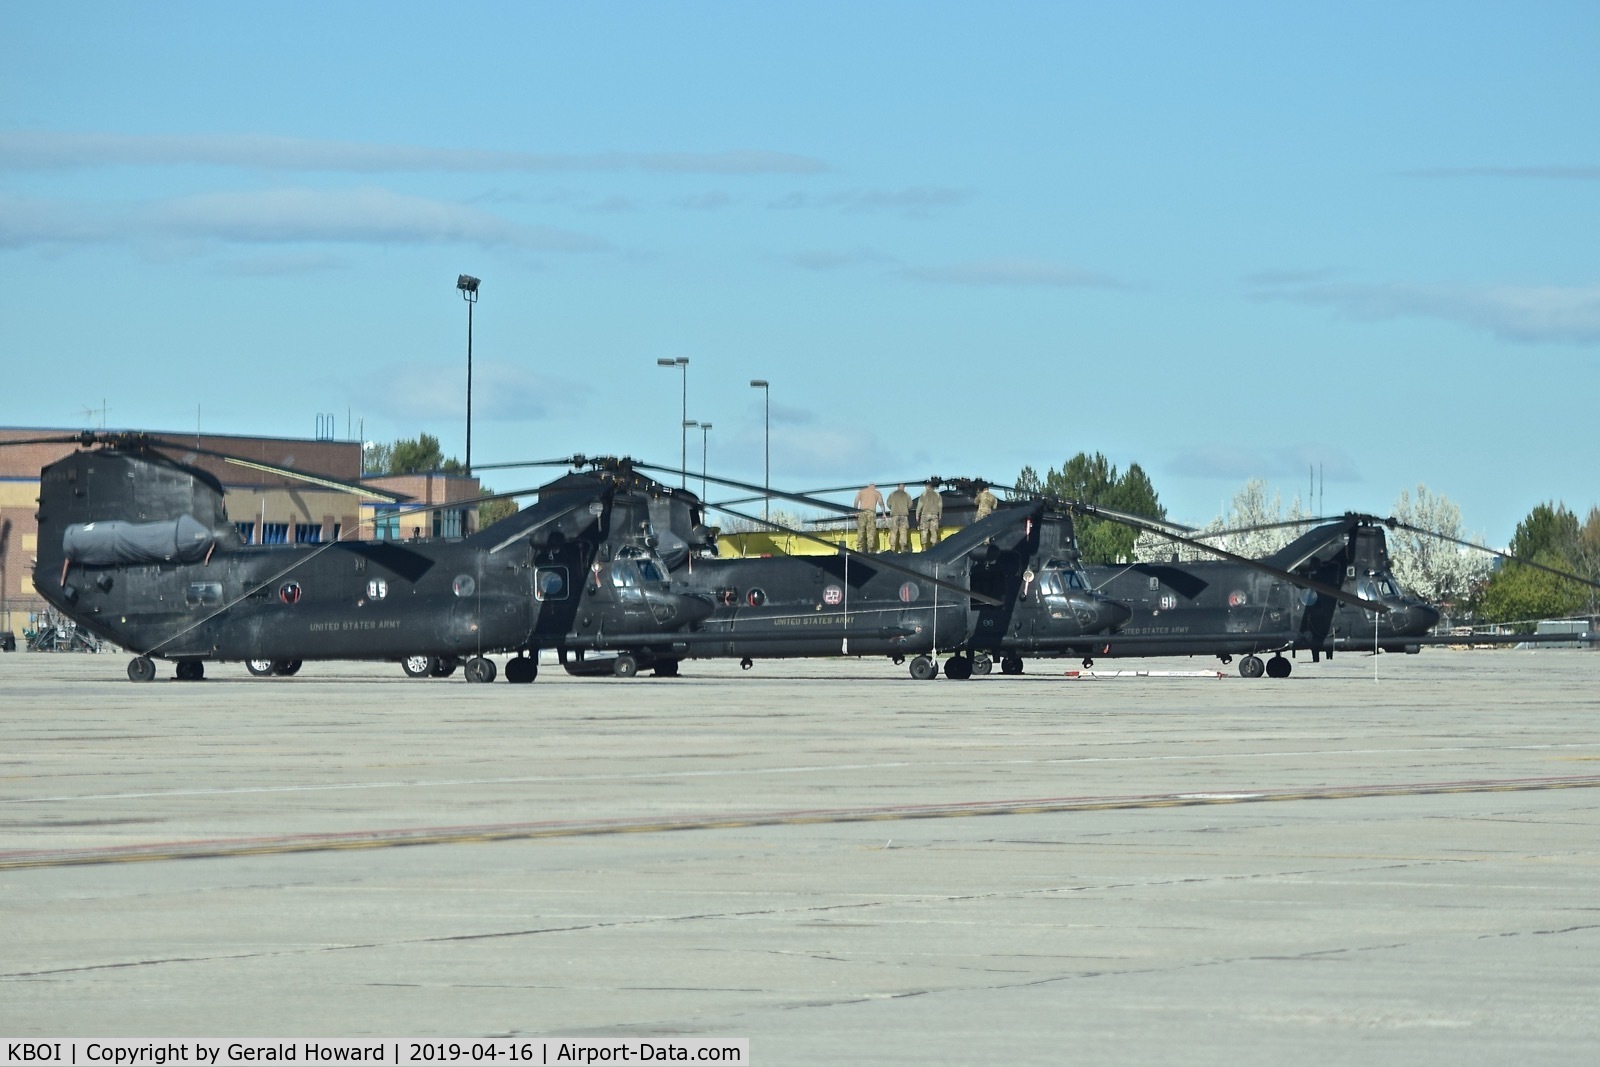 Boise Air Terminal/gowen Fld Airport (BOI) - Three MH-47G Chinooks from the U.S. Army's  160th Special Operations Aviation Regiment (SOAR)
“Night Stalkers” 4th BN, Joint Base Lewis-McChord, WA parked on the Idaho ANG ramp.
